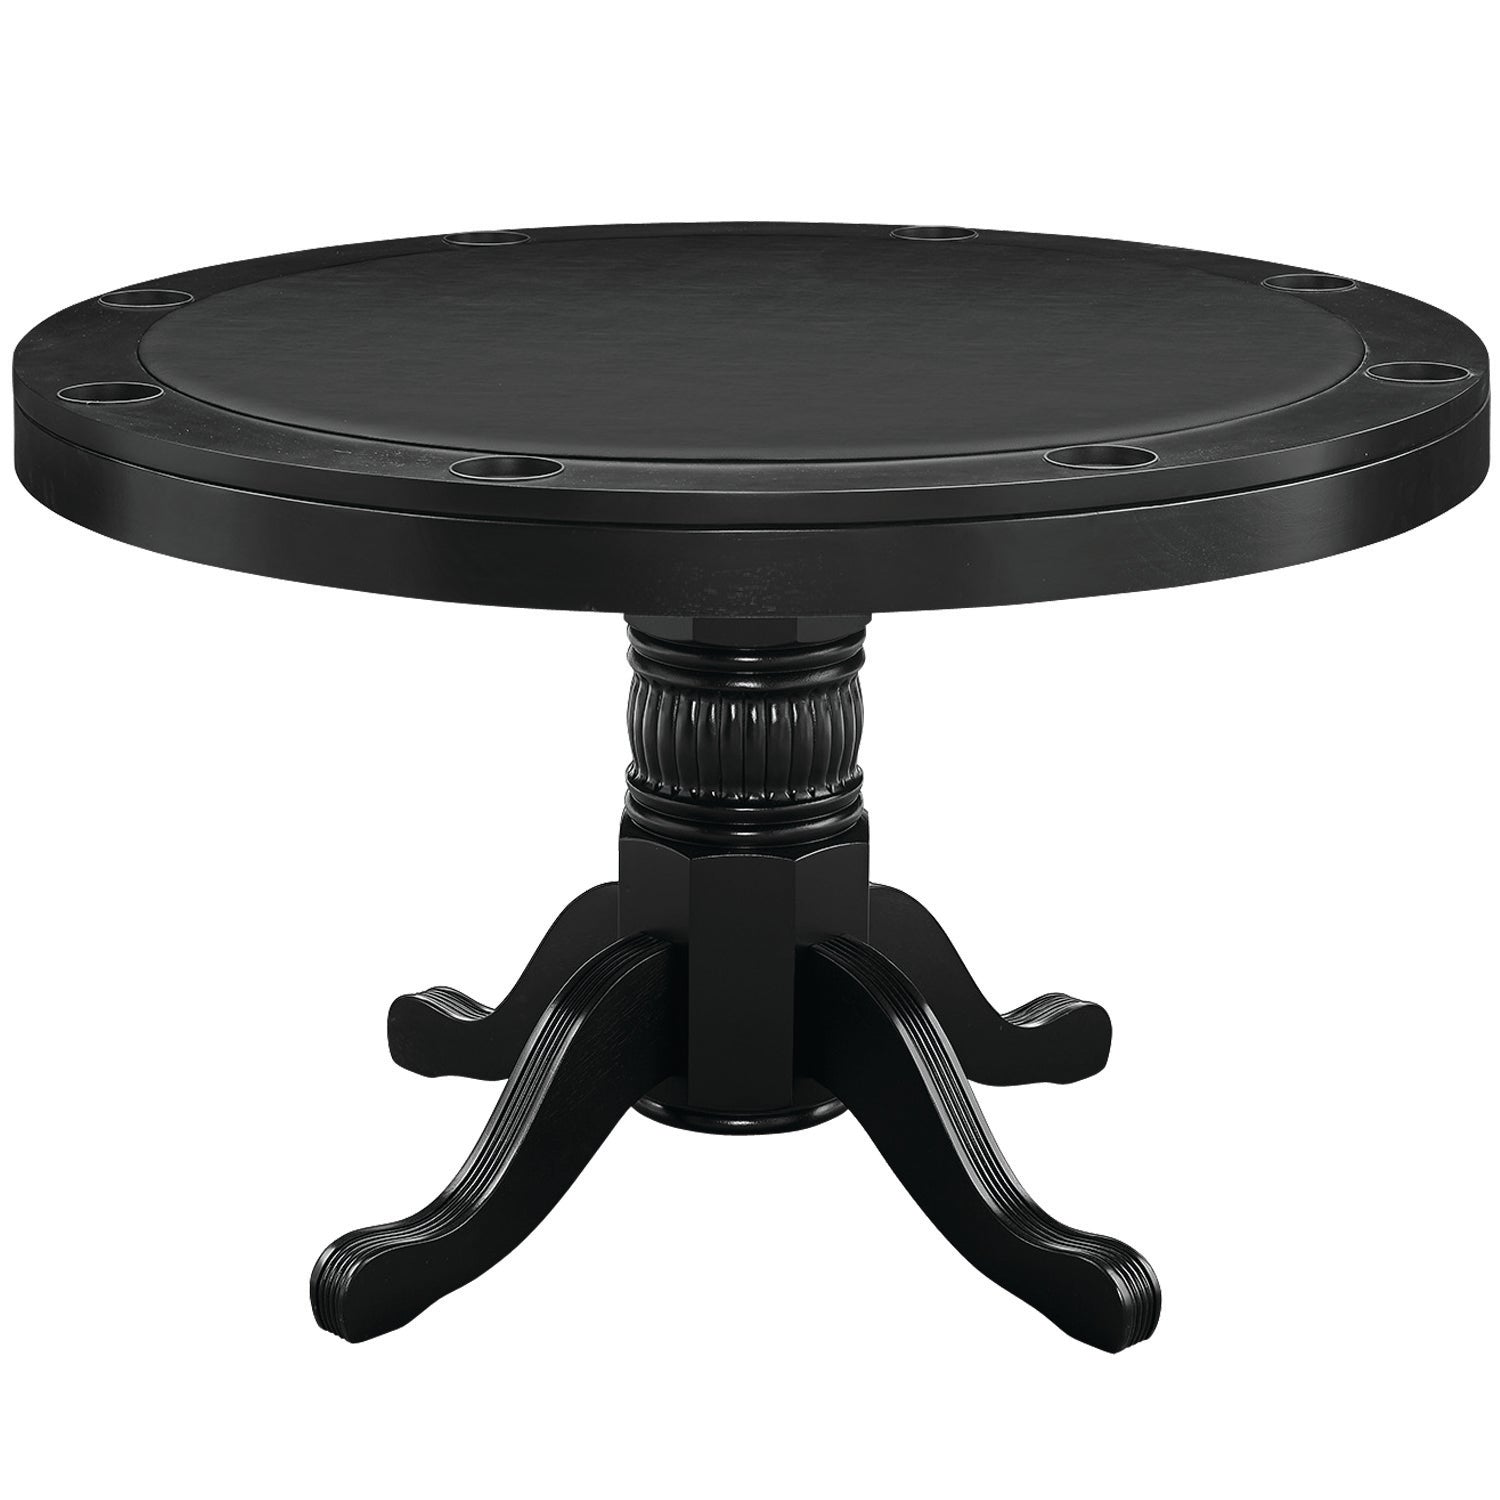 48 Inch Round Black Poker Table